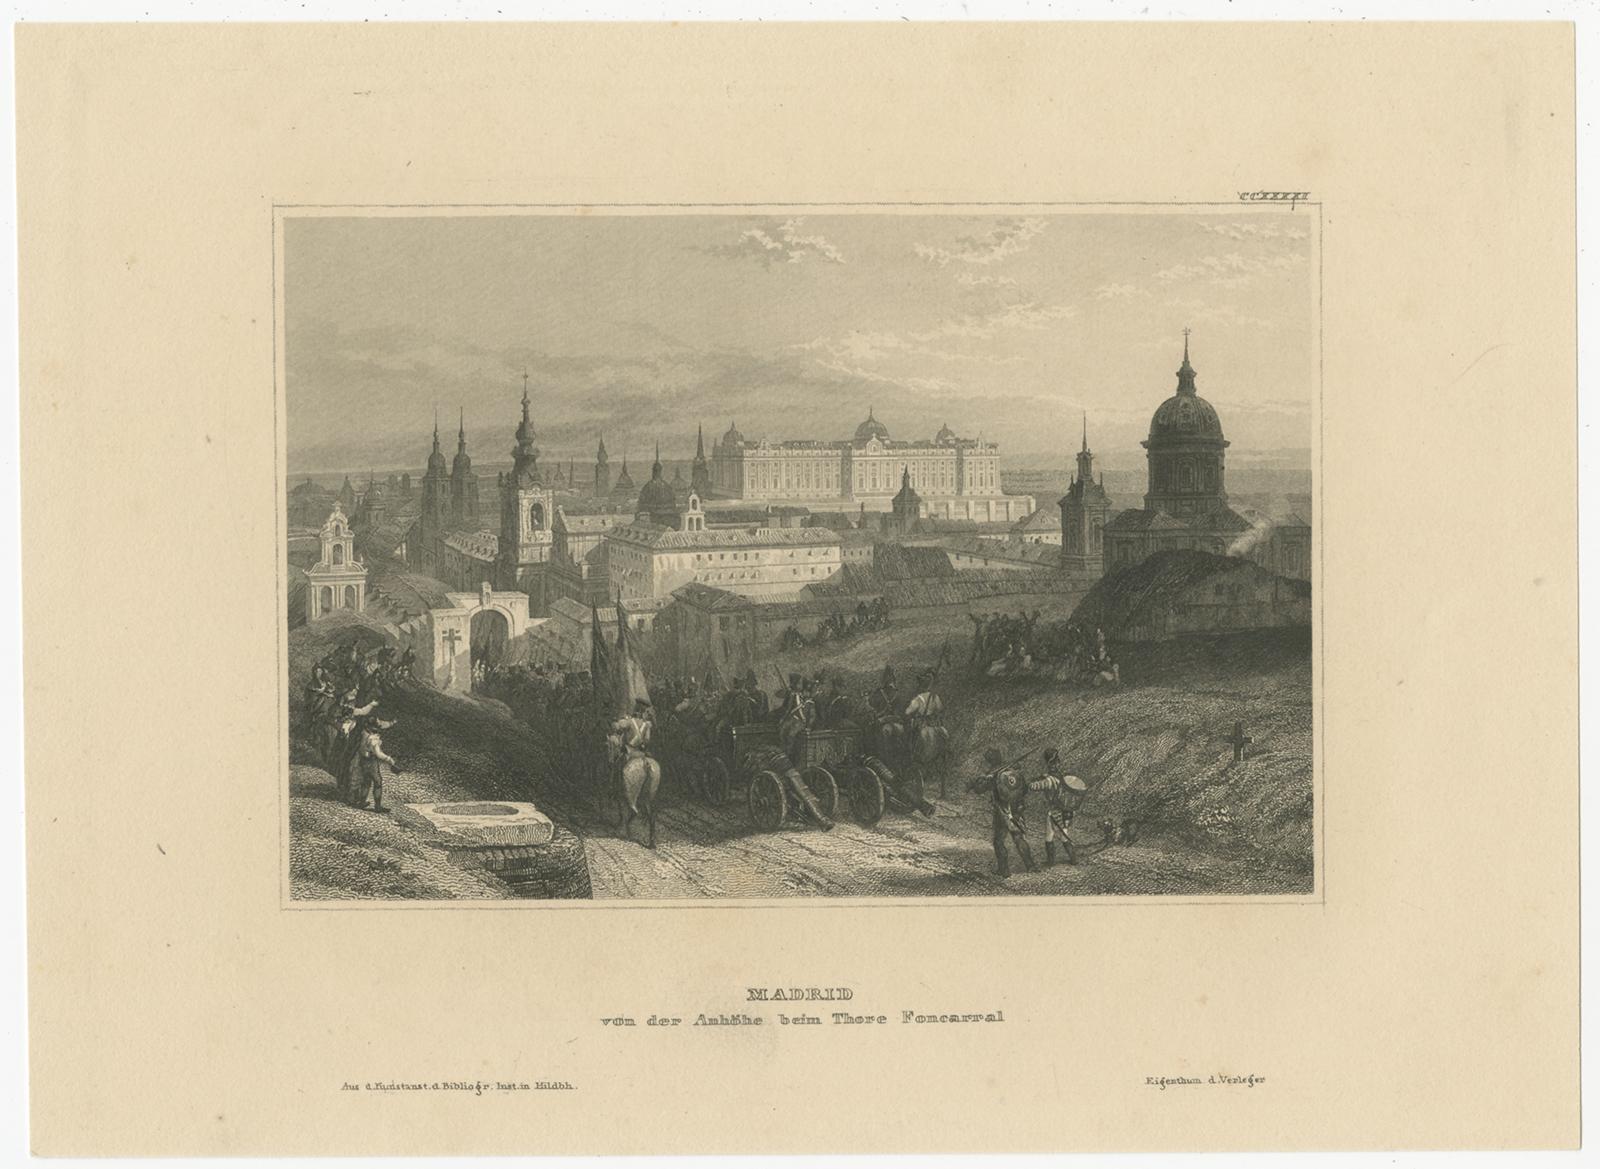 Antique print titled 'Madrid von der Anhöhe beim Thore Foncarral. View of Madris, seen from Calle Fuencarral, Spain. Originates from 'Meyers Universum'. Published circa 1840. 

Joseph Meyer (May 9, 1796 - June 27, 1856) was a German industrialist